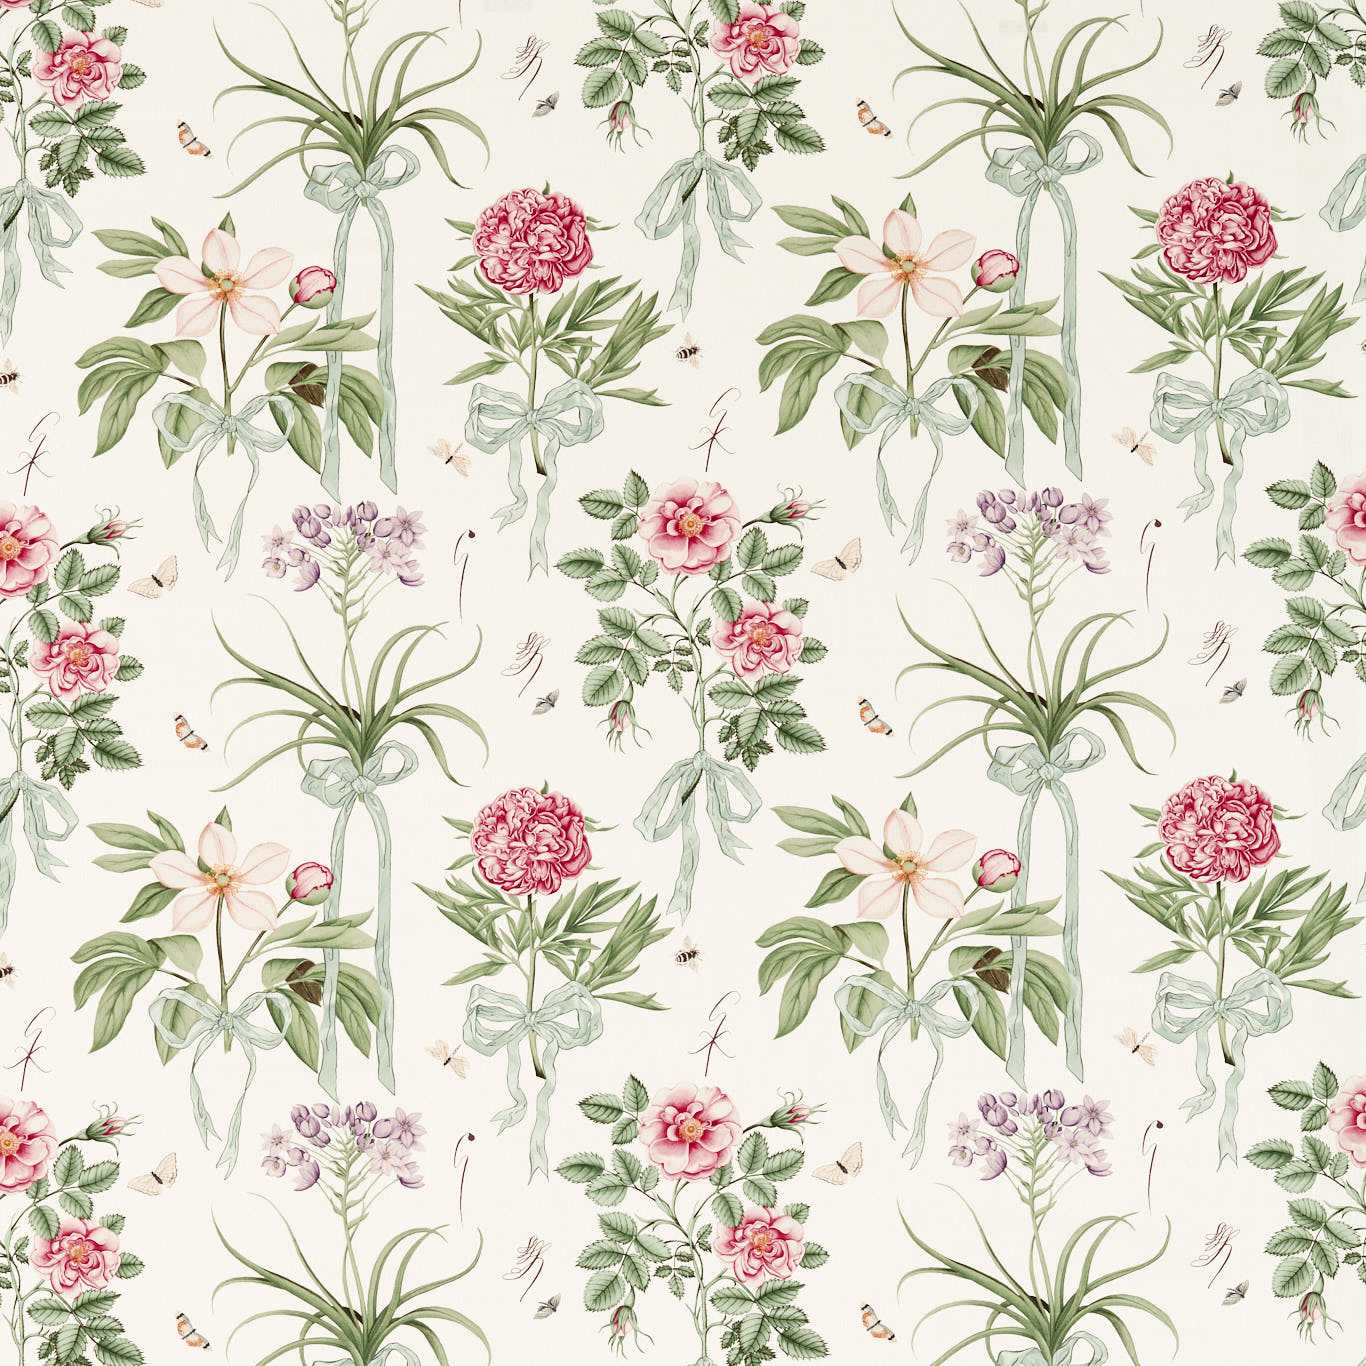 Cupid's Beau Parchment/Madder Fabric by SAN